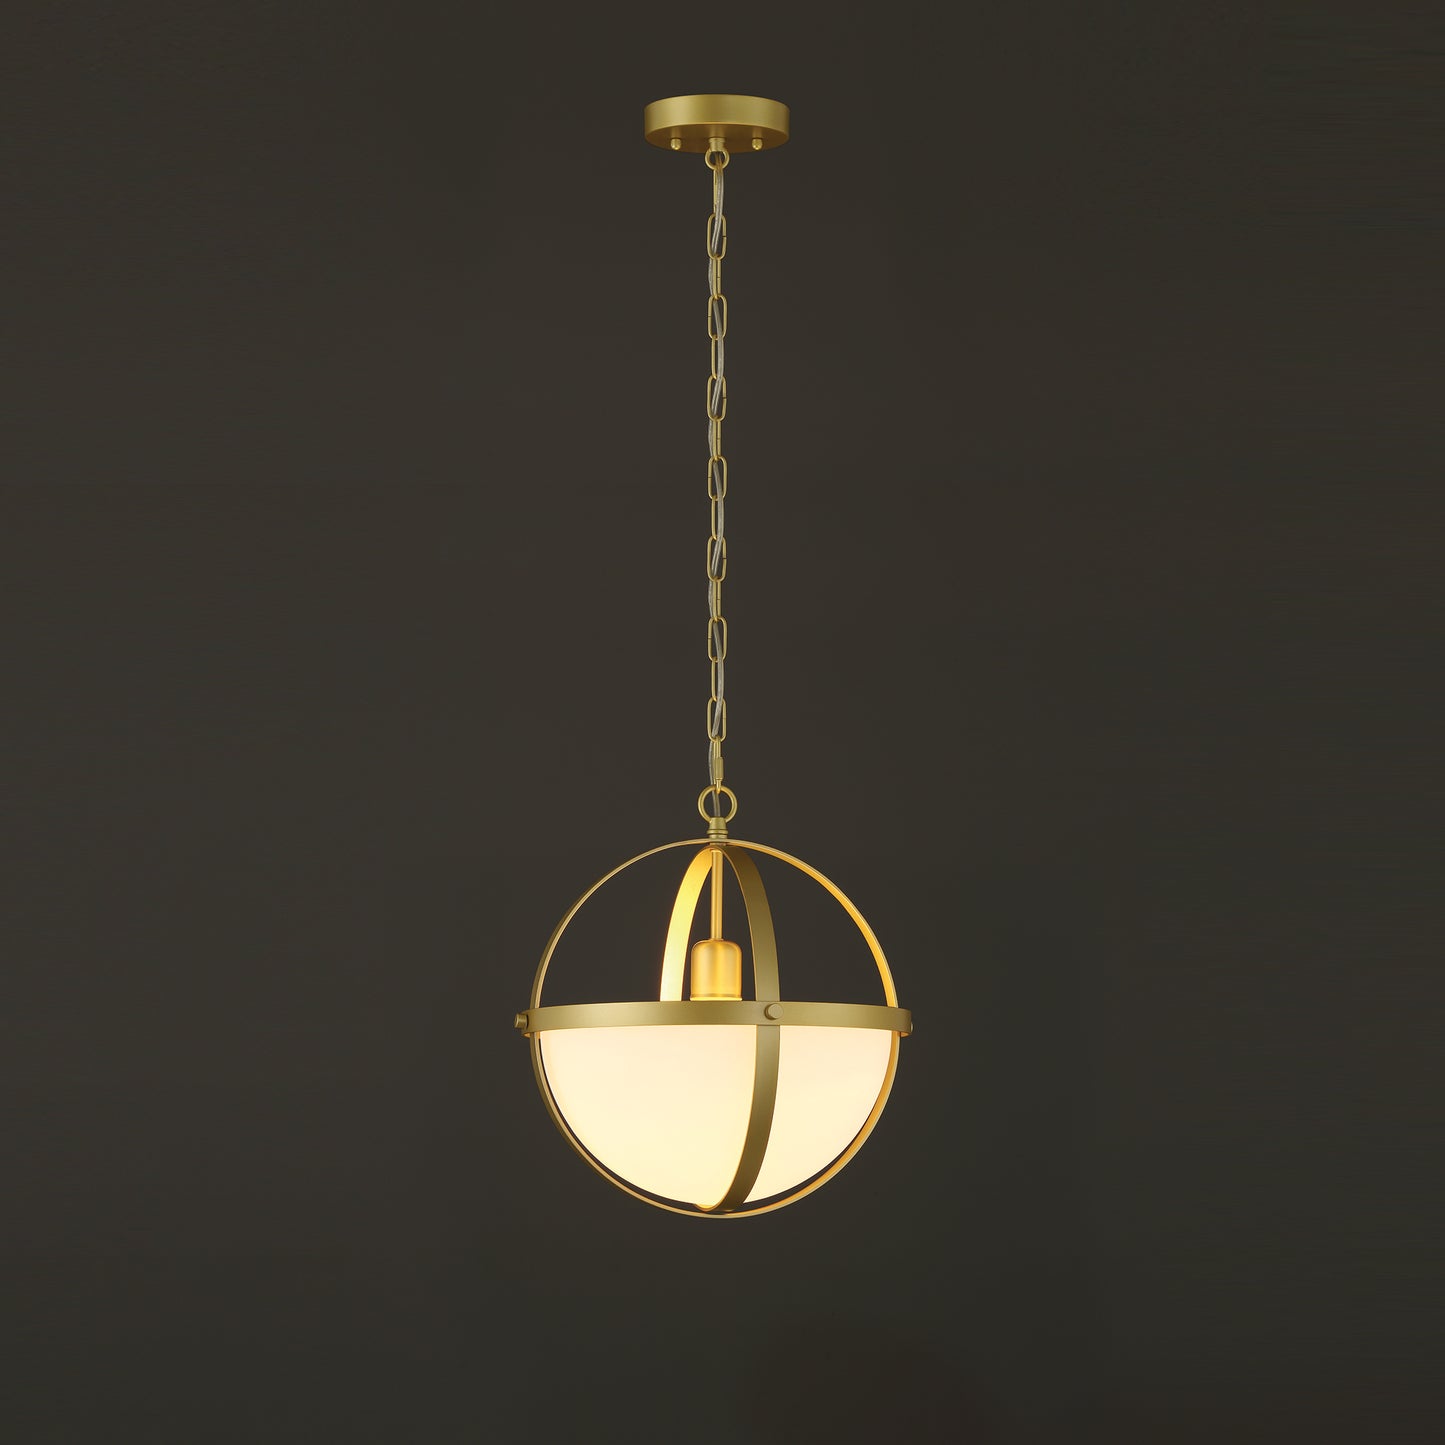 1 light gold sphere pendant (7) by ACROMA